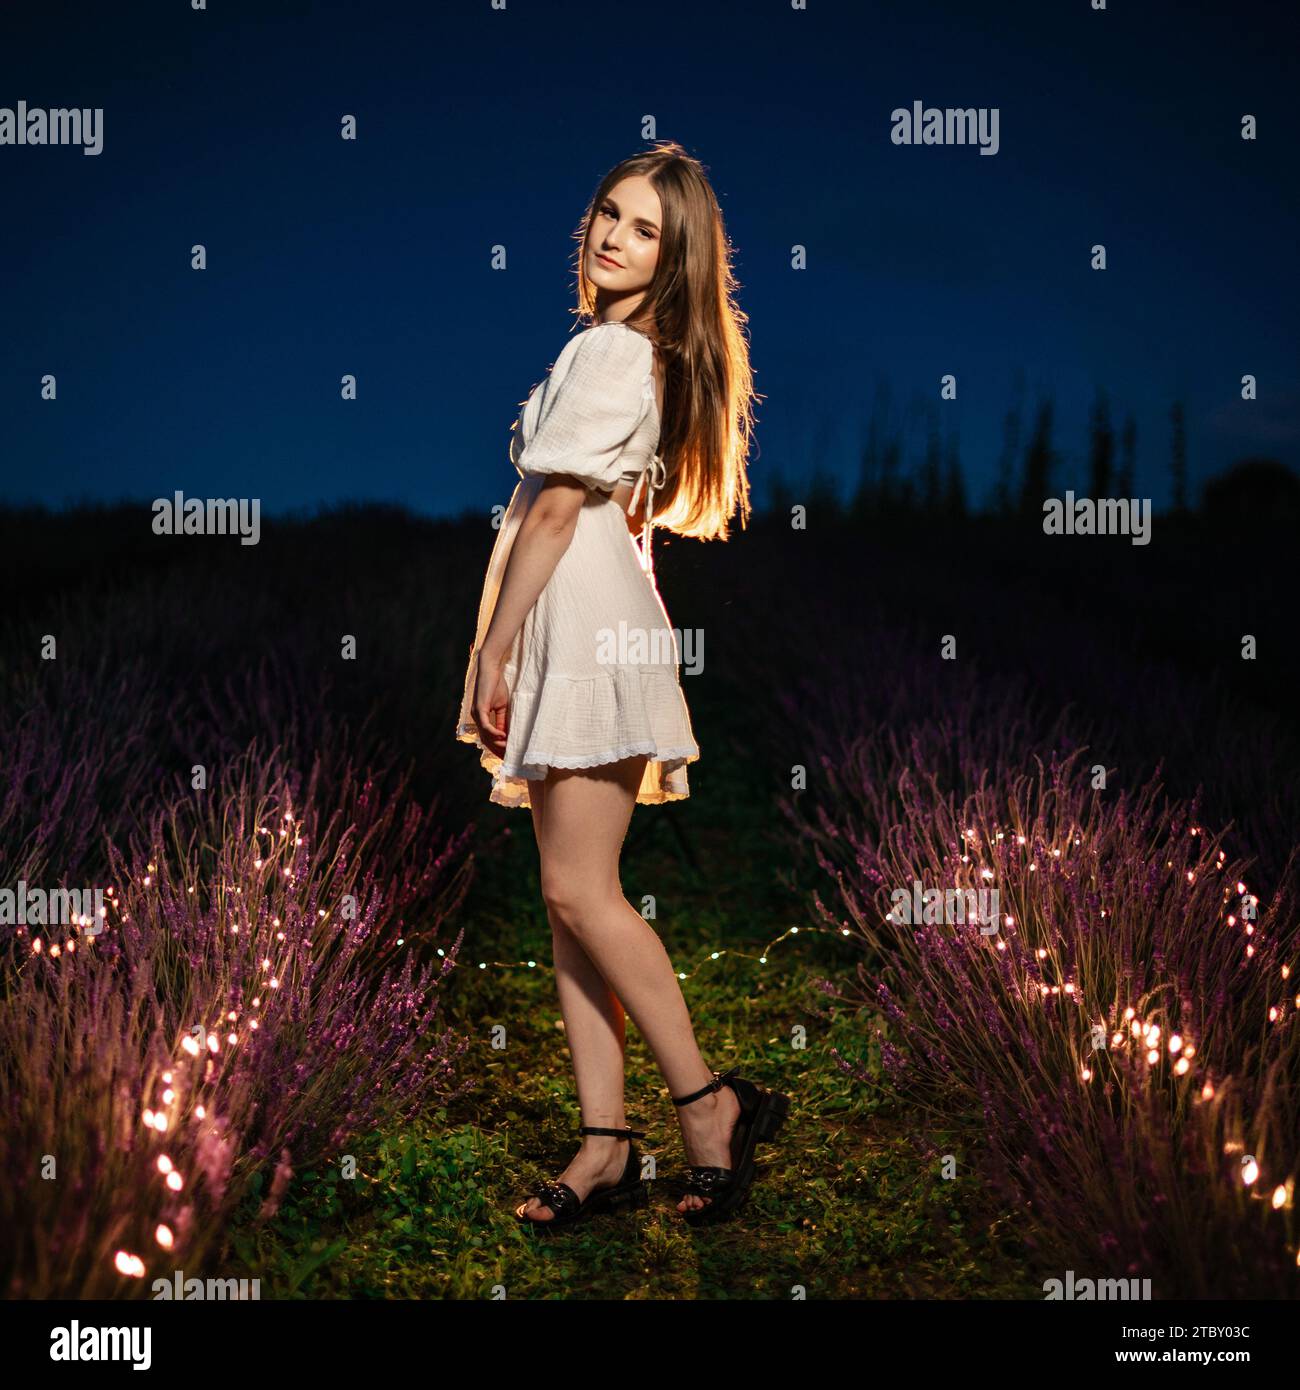 Ivano-Frankivsk, Ukraine July 28, 2023: The girl is between rows of lavender, lavender bushes and flowers are illuminated by garlands, aromatherapy in Stock Photo